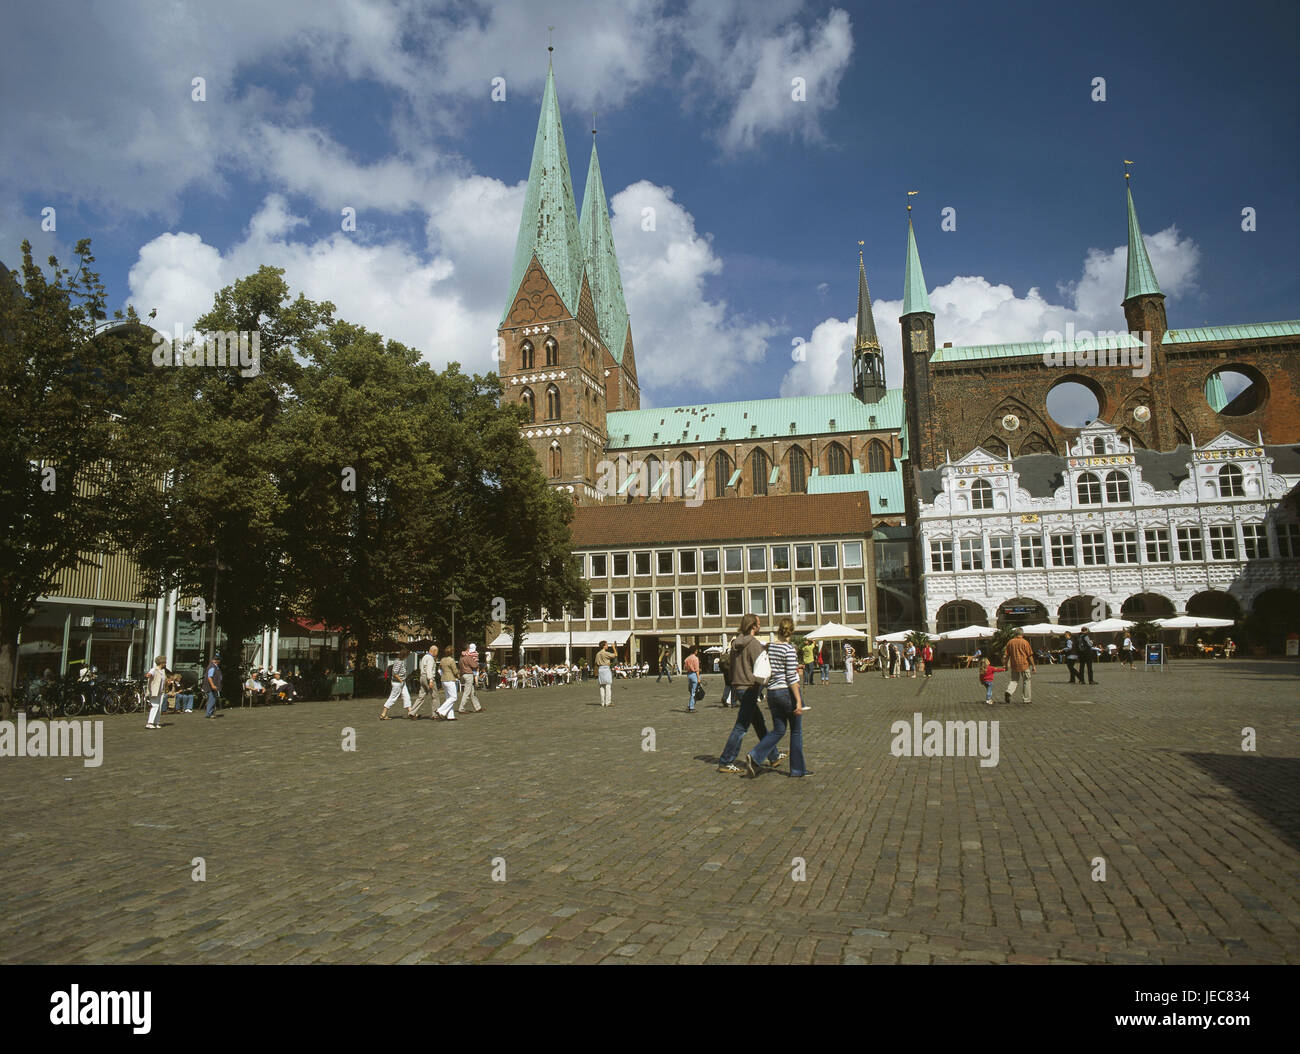 Germany, Schleswig - Holstein, Lübeck, Old Town, city hall, Renaissance bower, show wall, Marien's church, passer-by, North Germany, Hanseatic town, Old Town island, structures, architecture, historically, show wall, city hall building, square, brick building, brick, wind holes, turrets, broken through, to Renaissance foliage, Renaissance wing, sacred construction, church, brick Gothic, market, architecture, people, place of interest, UNESCO-world cultural heritage, outside, Stock Photo